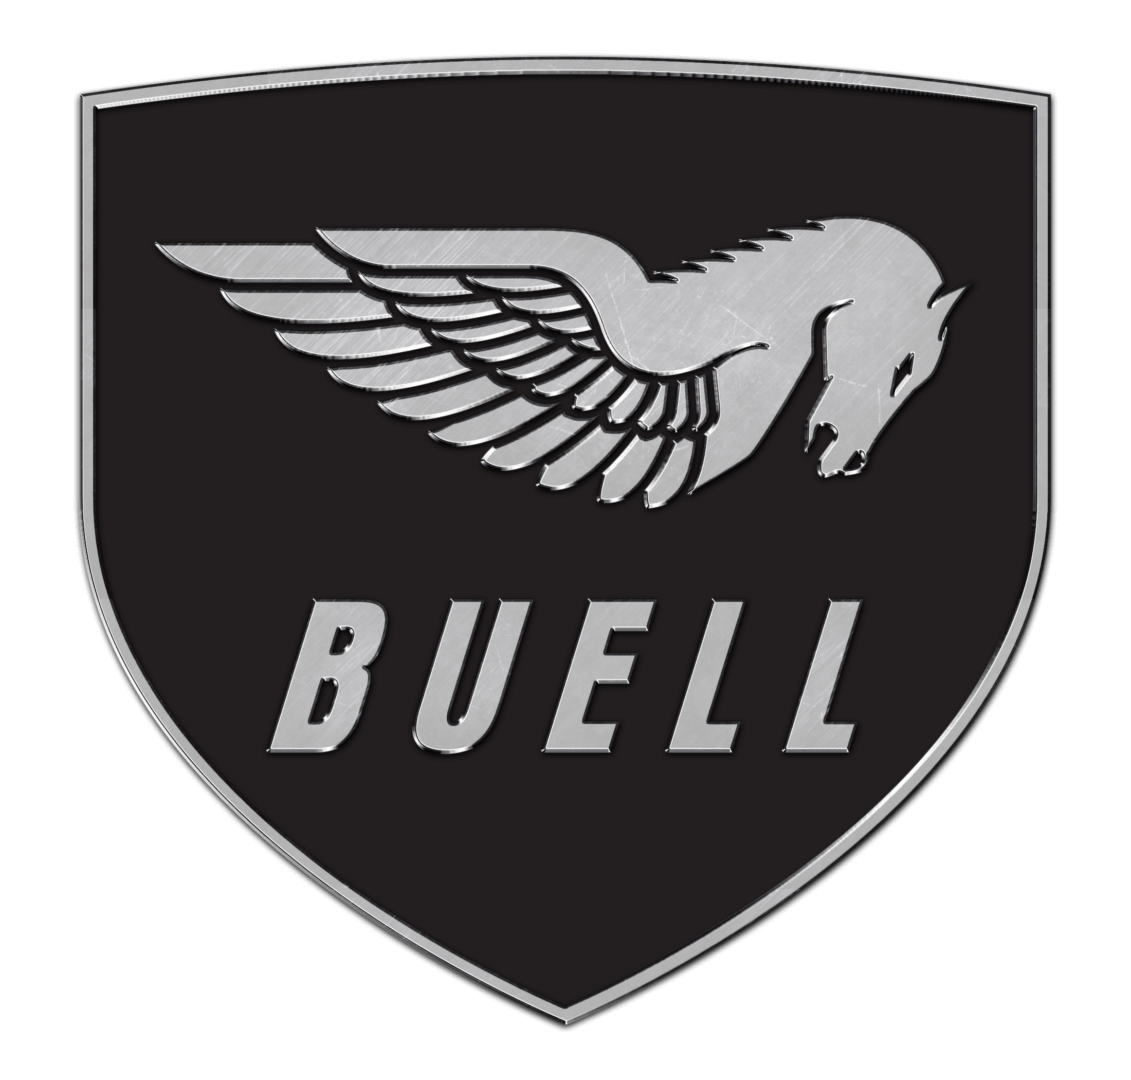 Buell motorcycle  logo  history and Meaning bike  emblem